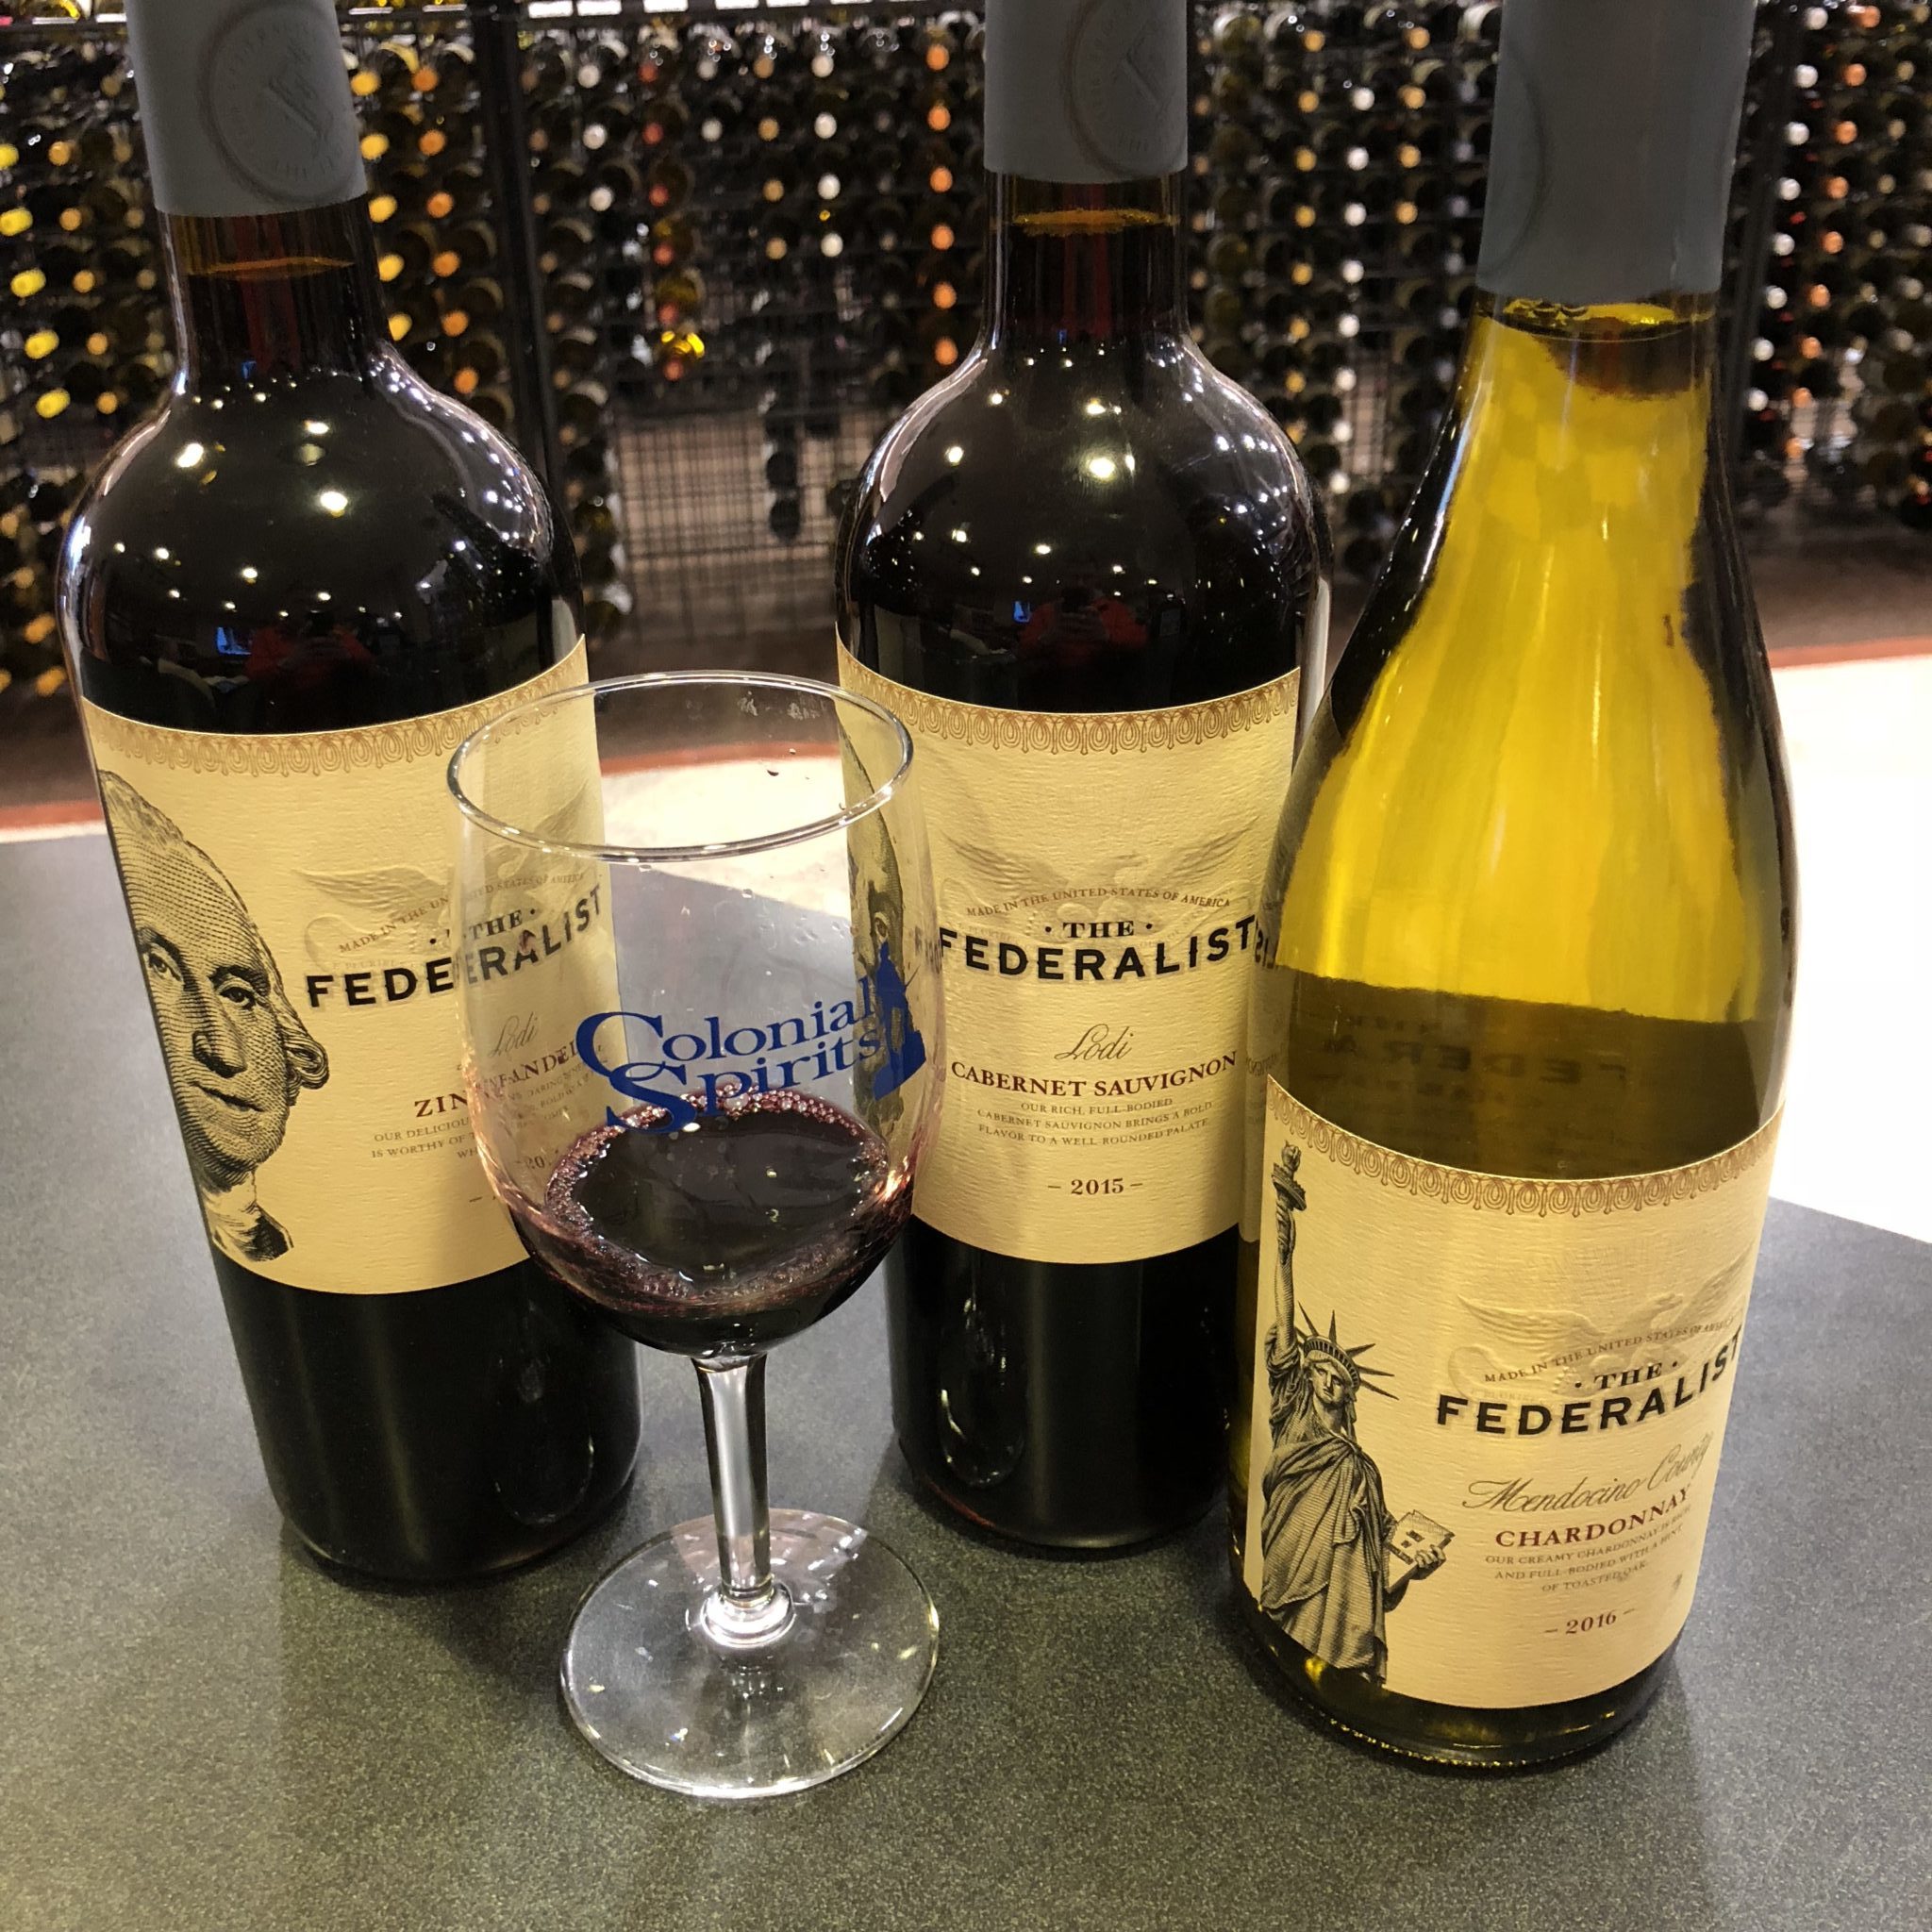 The Federalist Wines